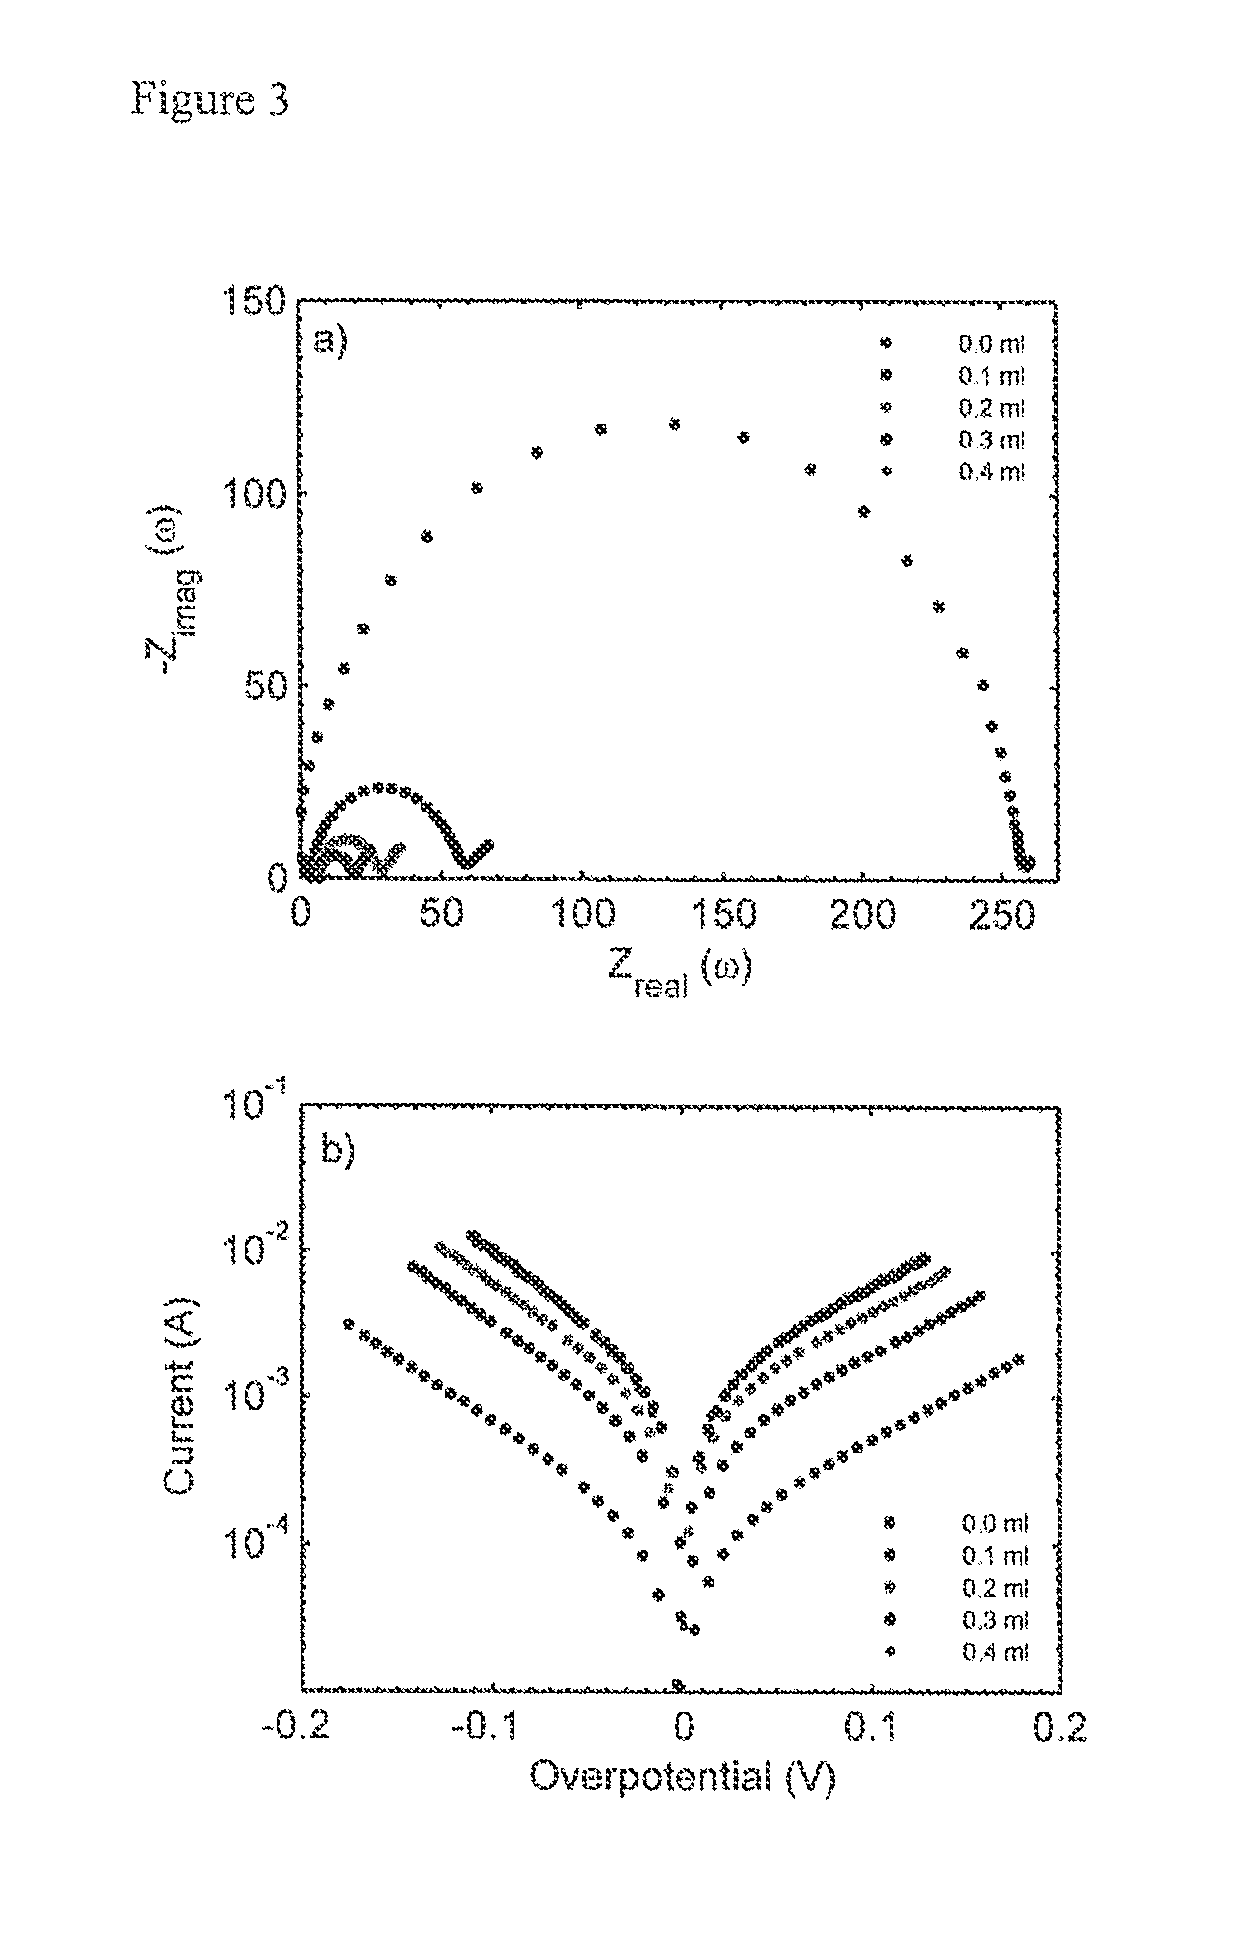 Process of increasing energy conversion and electrochemical efficiency of a scaffold material using a deposition material